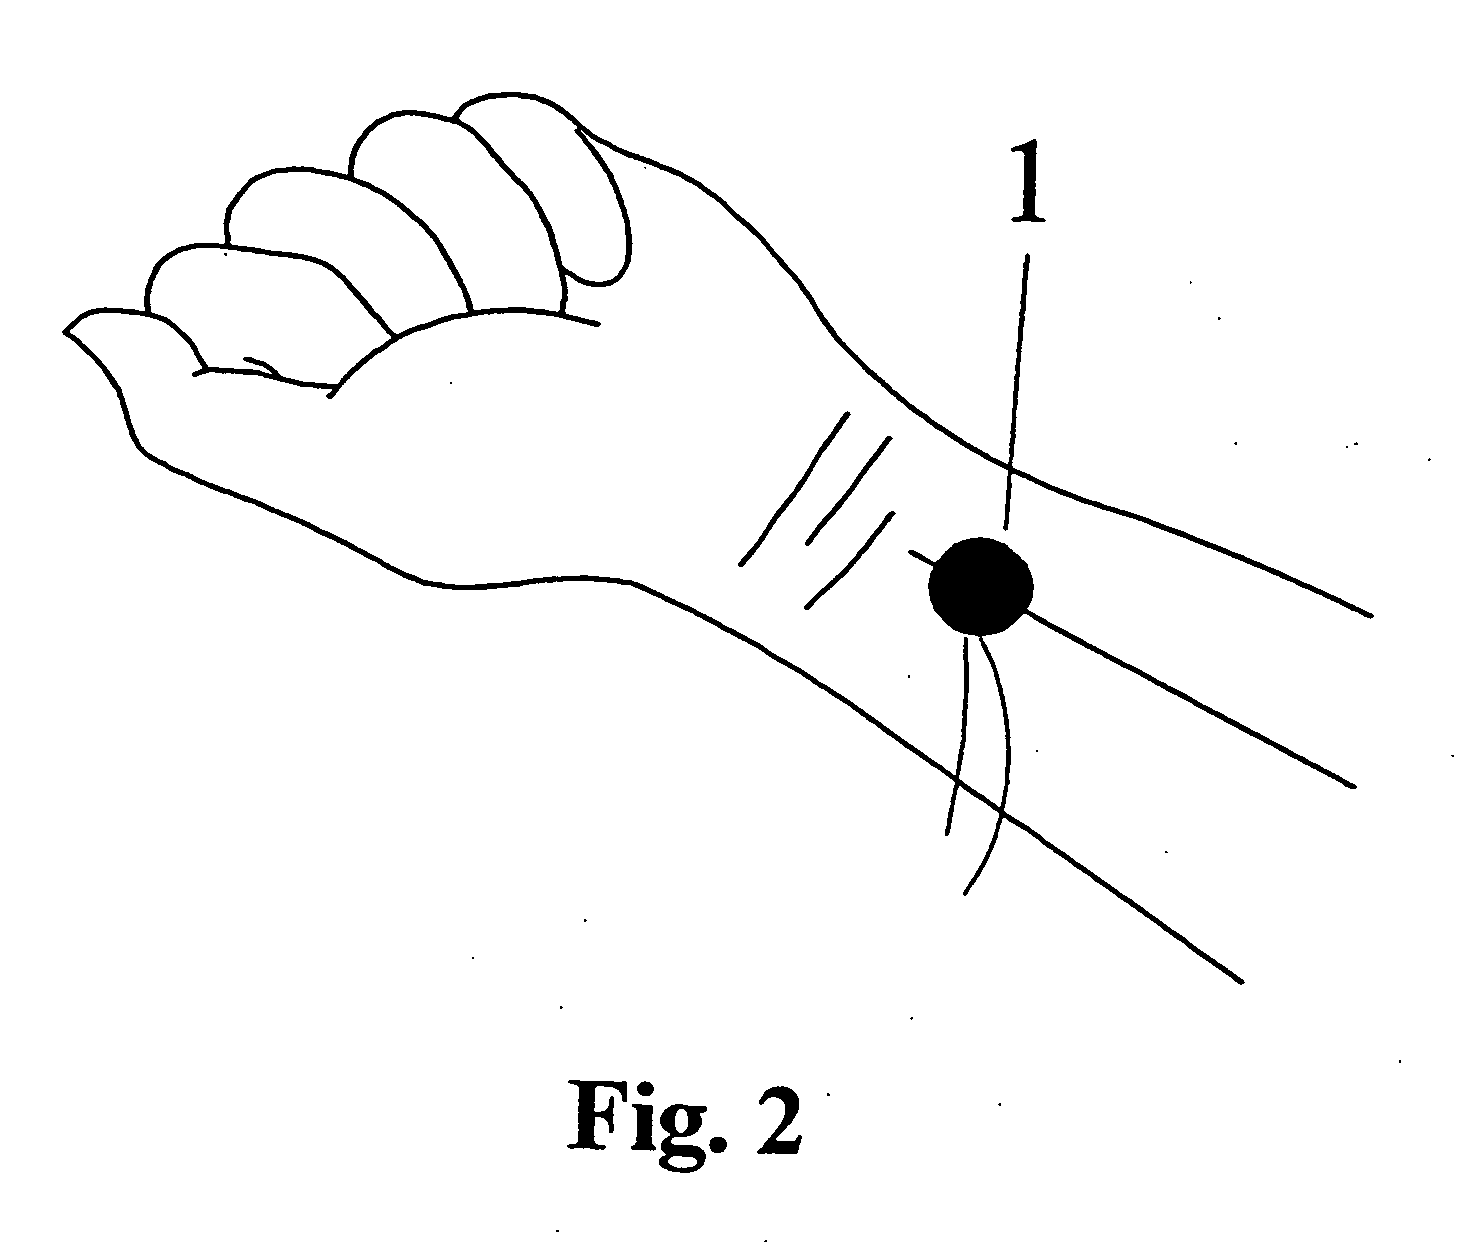 Non-invasive radial artery blood pressure waveform measuring apparatus system and uses thereof